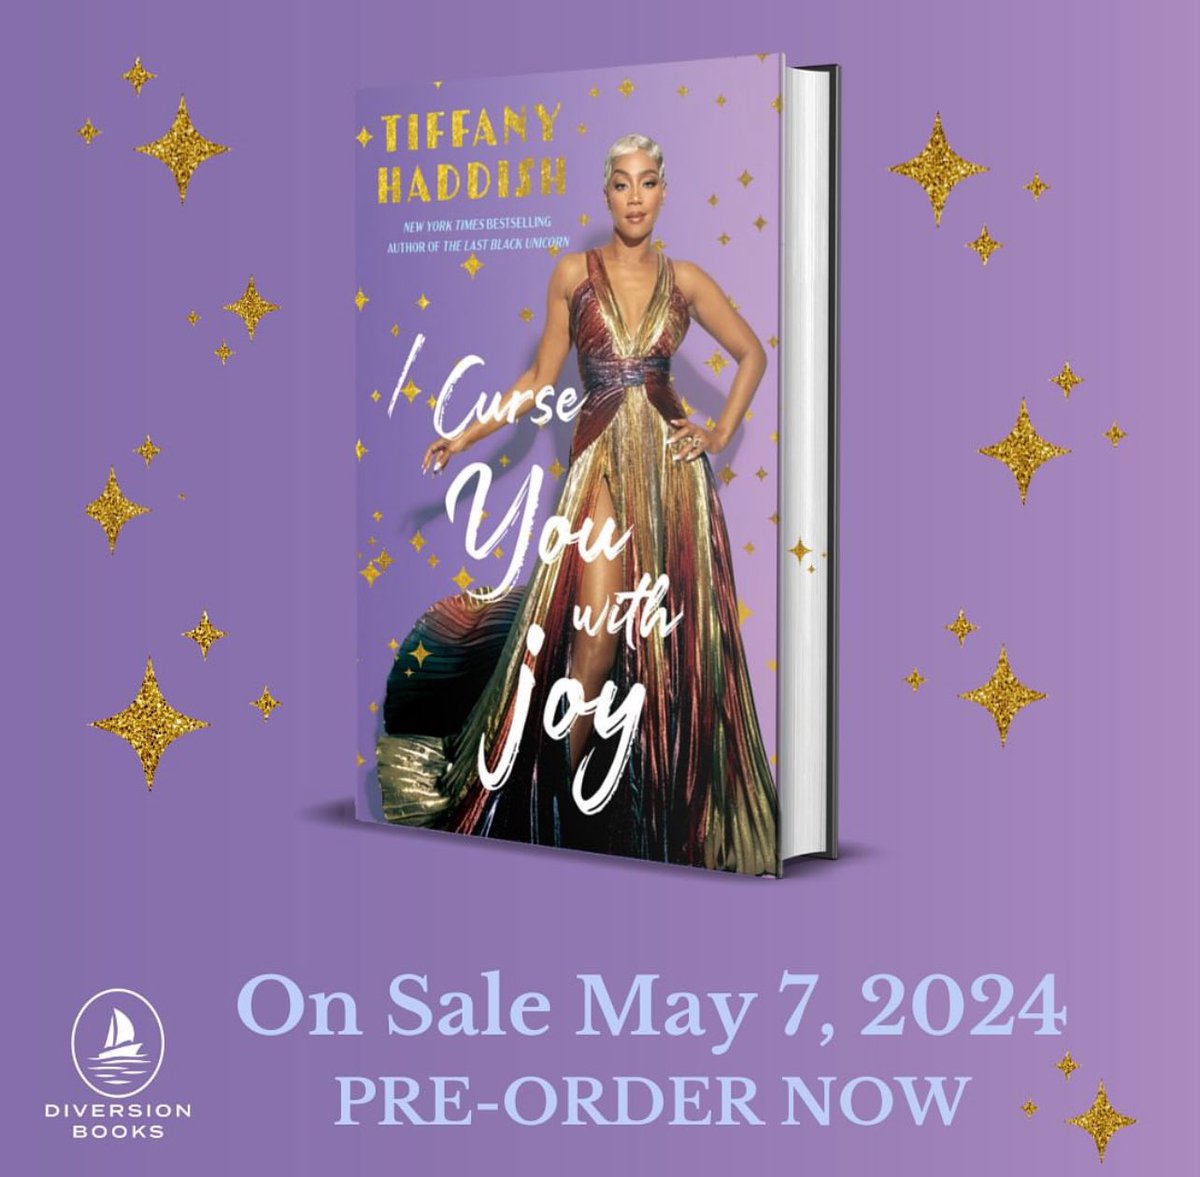 ✨⭐️⭐️✨✨
“I CURSE YOU WITH JOY”
NEW BOOK BY @tiffanyhaddish 📕
“IN MORE THAN A DOZEN STORIES
TIFFANY HADDISH IS CANDID
ABOUT HER HIGHS, LOWS AND
EVERYTHING IN BETWEEN”
#PRE ORDER YOUR COPY NOW!
#author #tiffanyhaddish #book
#icurseyouwithjoy #spreadtheword